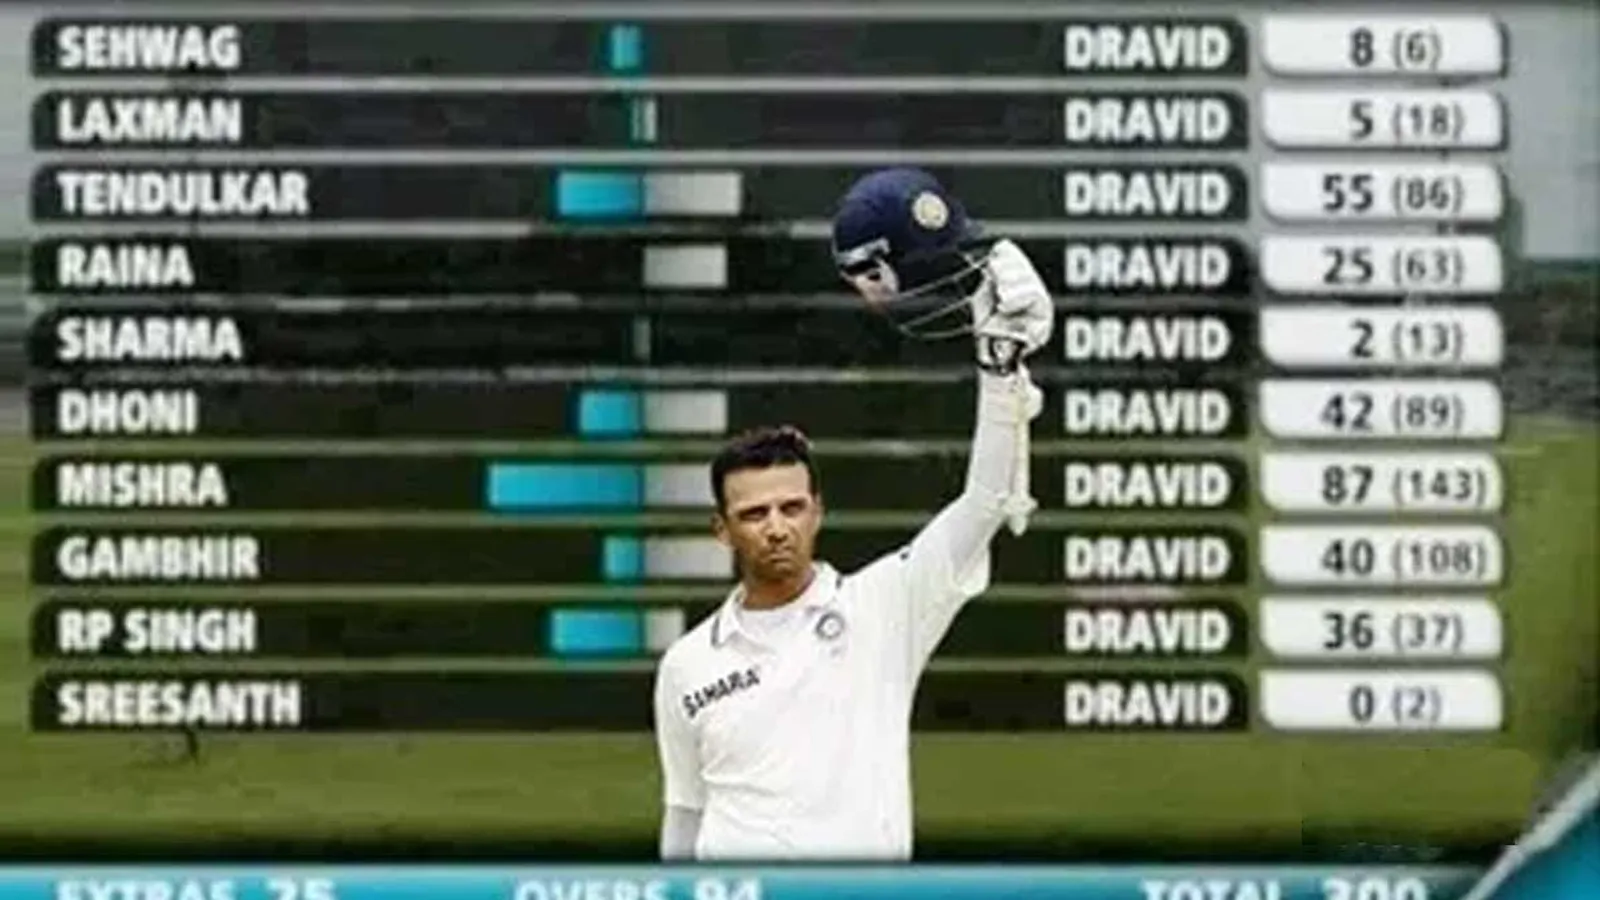 Rahul Dravid not out